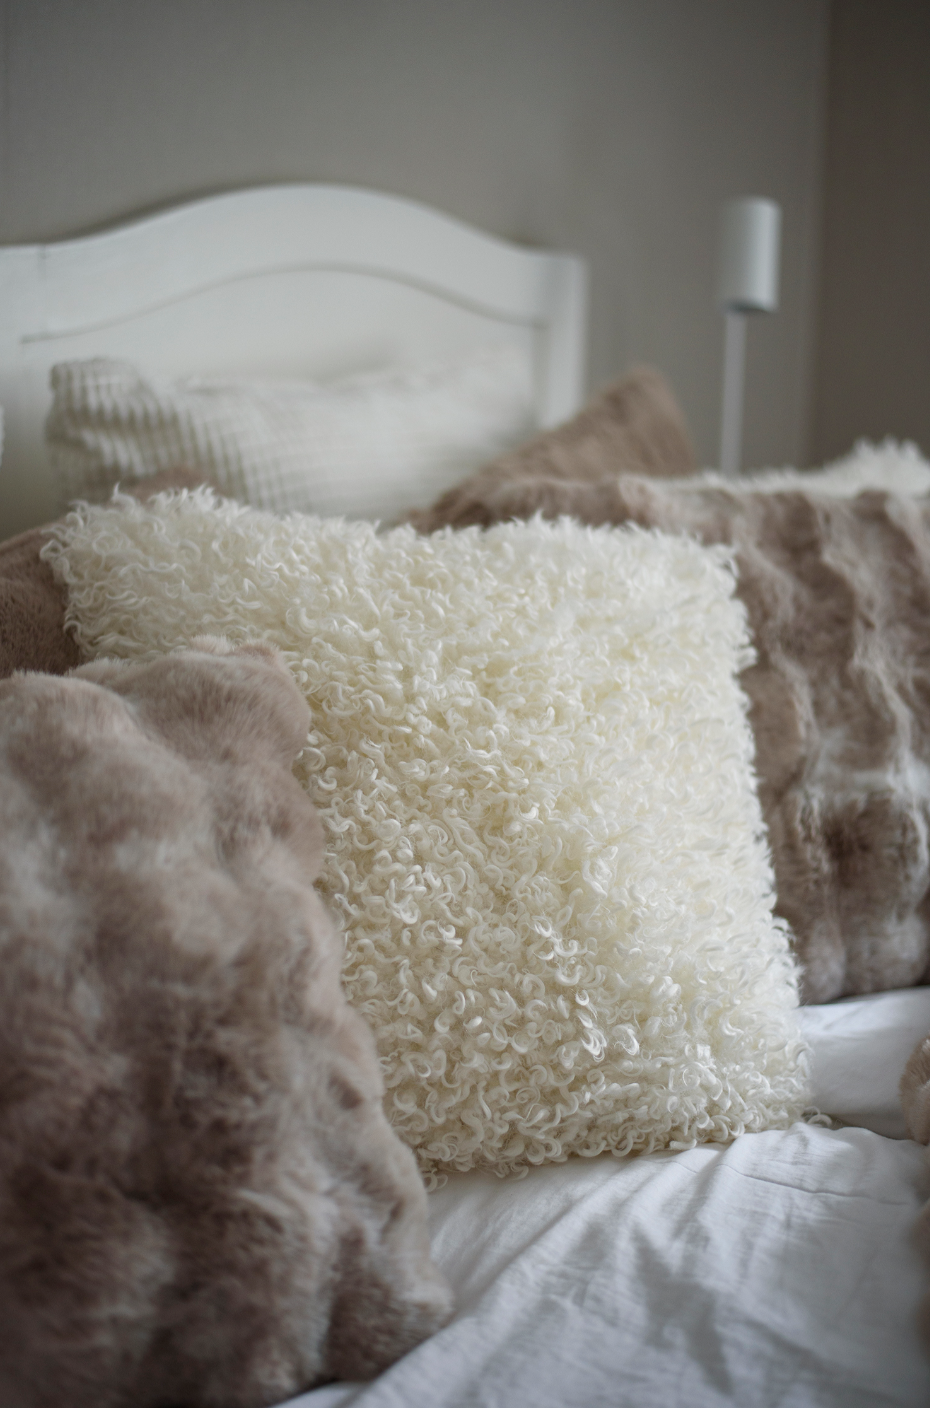 WOOLY - Coussin - Beige